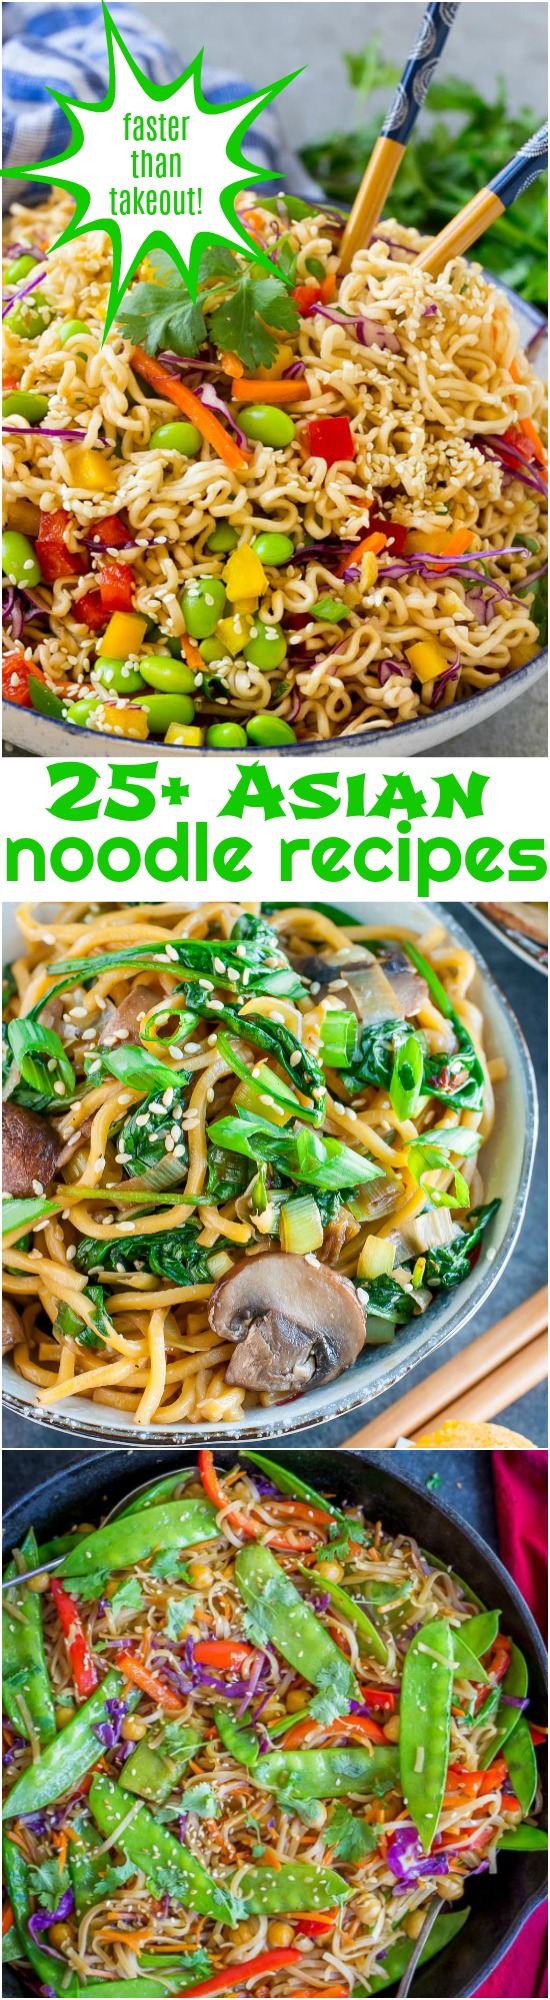 25+ asian noodle recipes that are easier than takeout